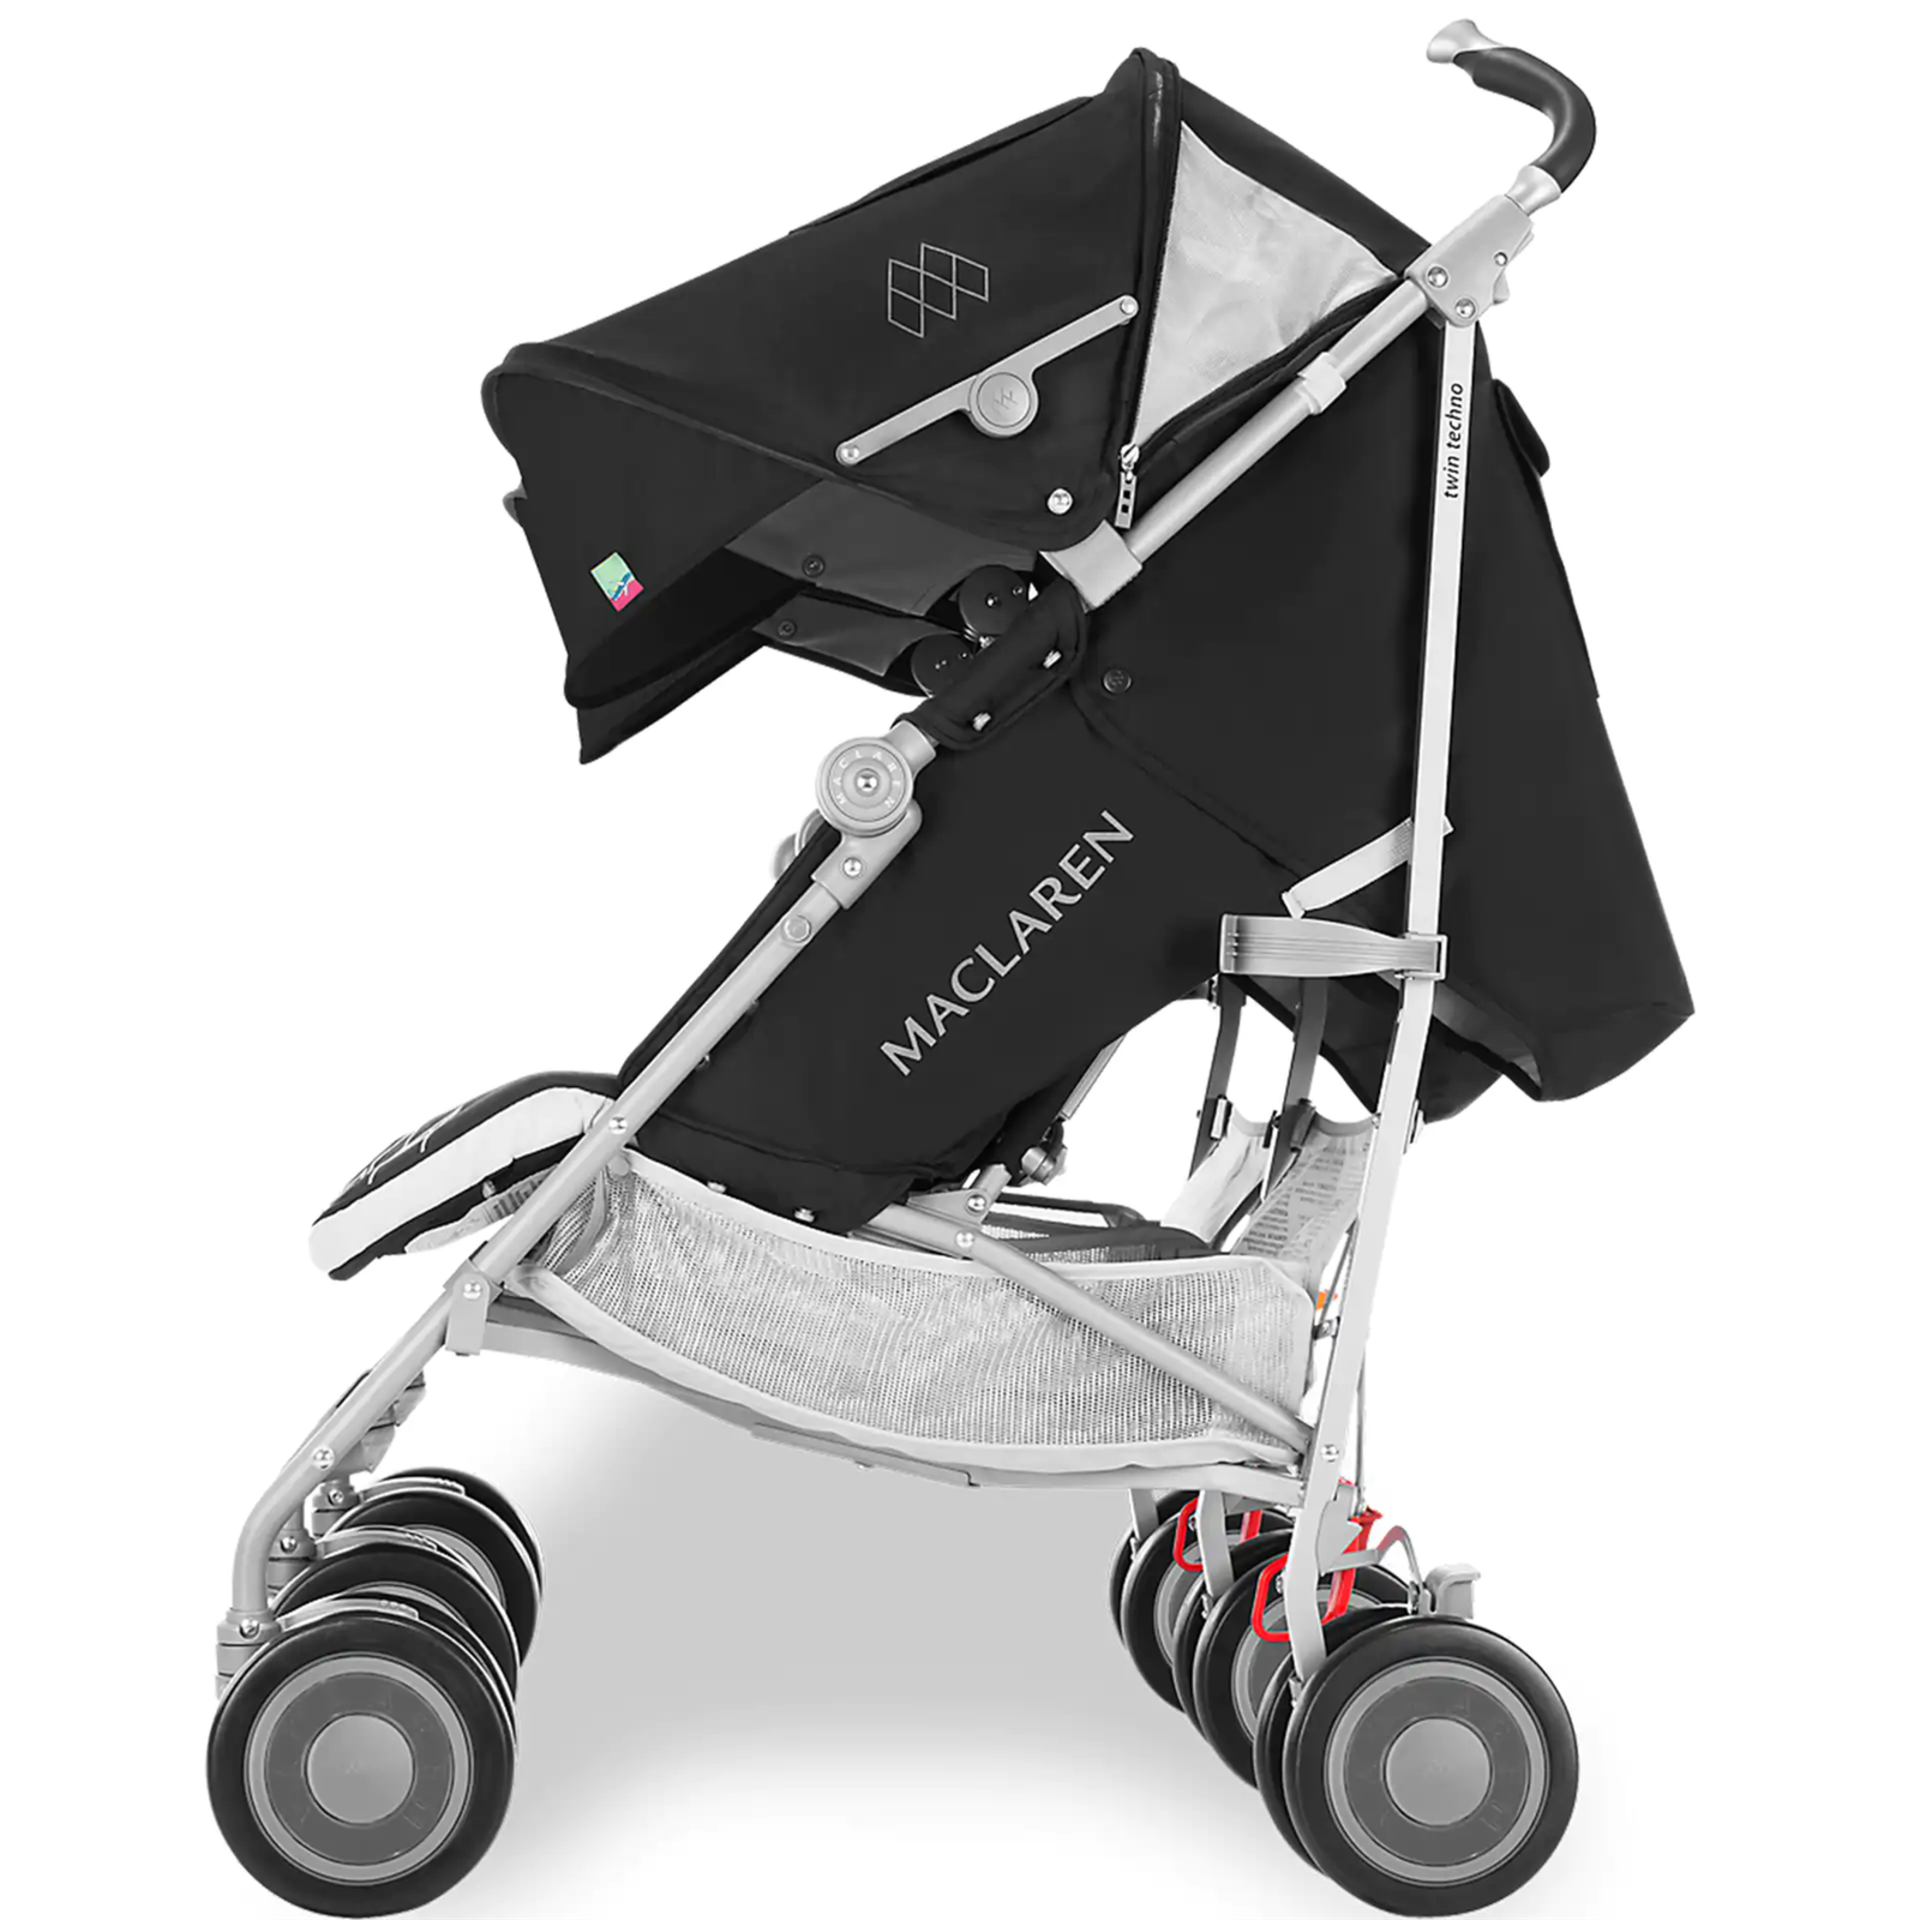 Maclaren Pushchair Twin Techno Black Built For Comfort/Performance For 2 Rrp £450 - Image 5 of 7